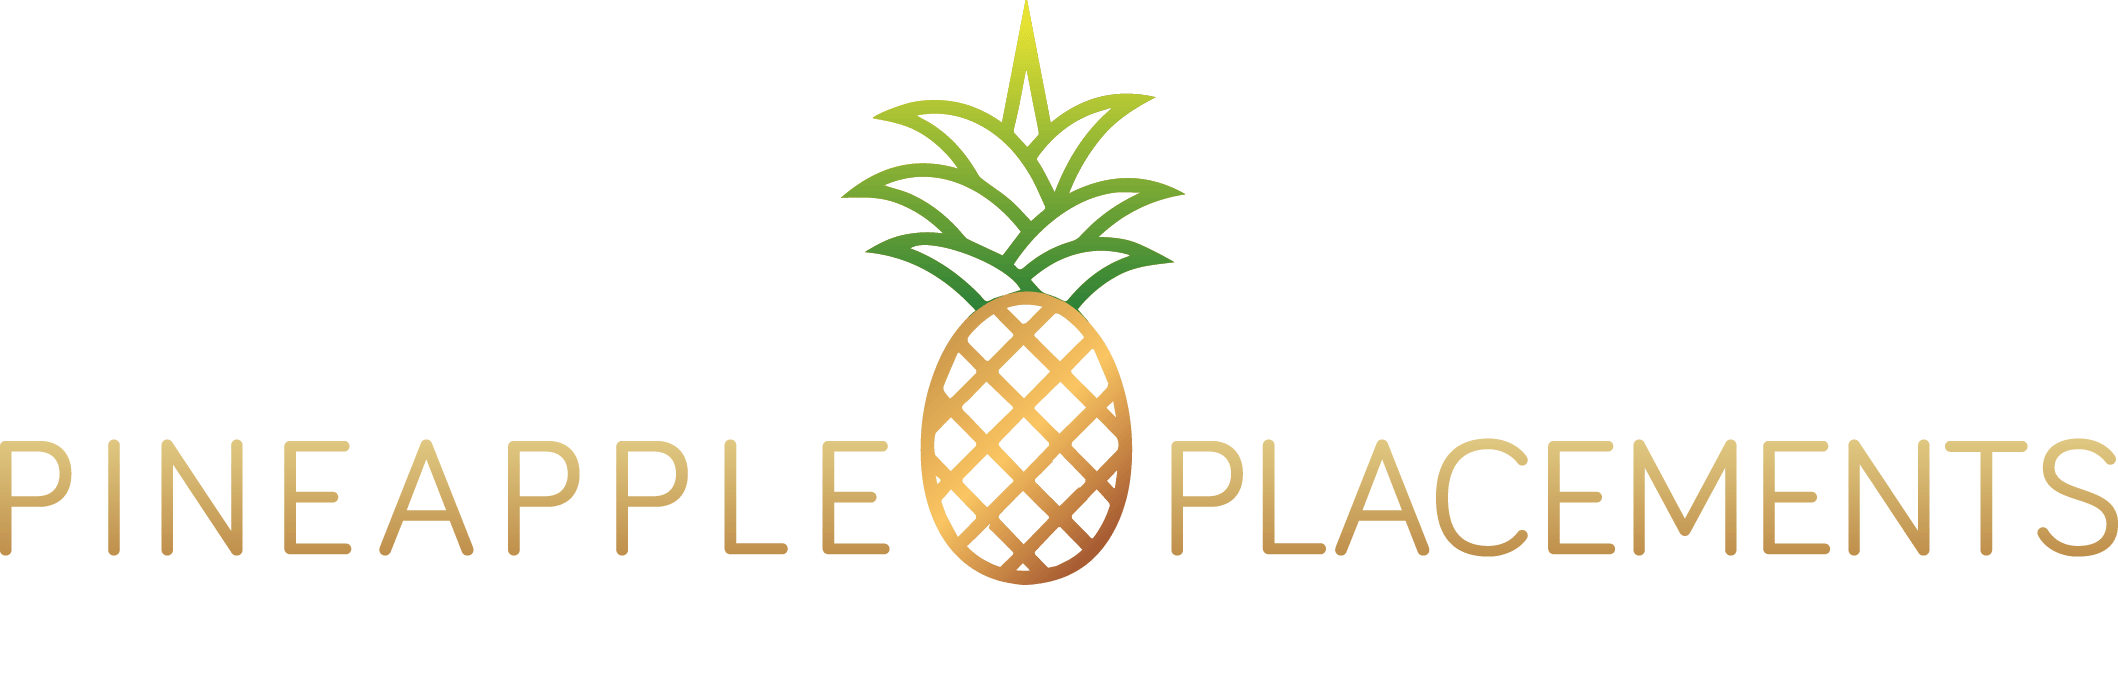 Pineapple Placements